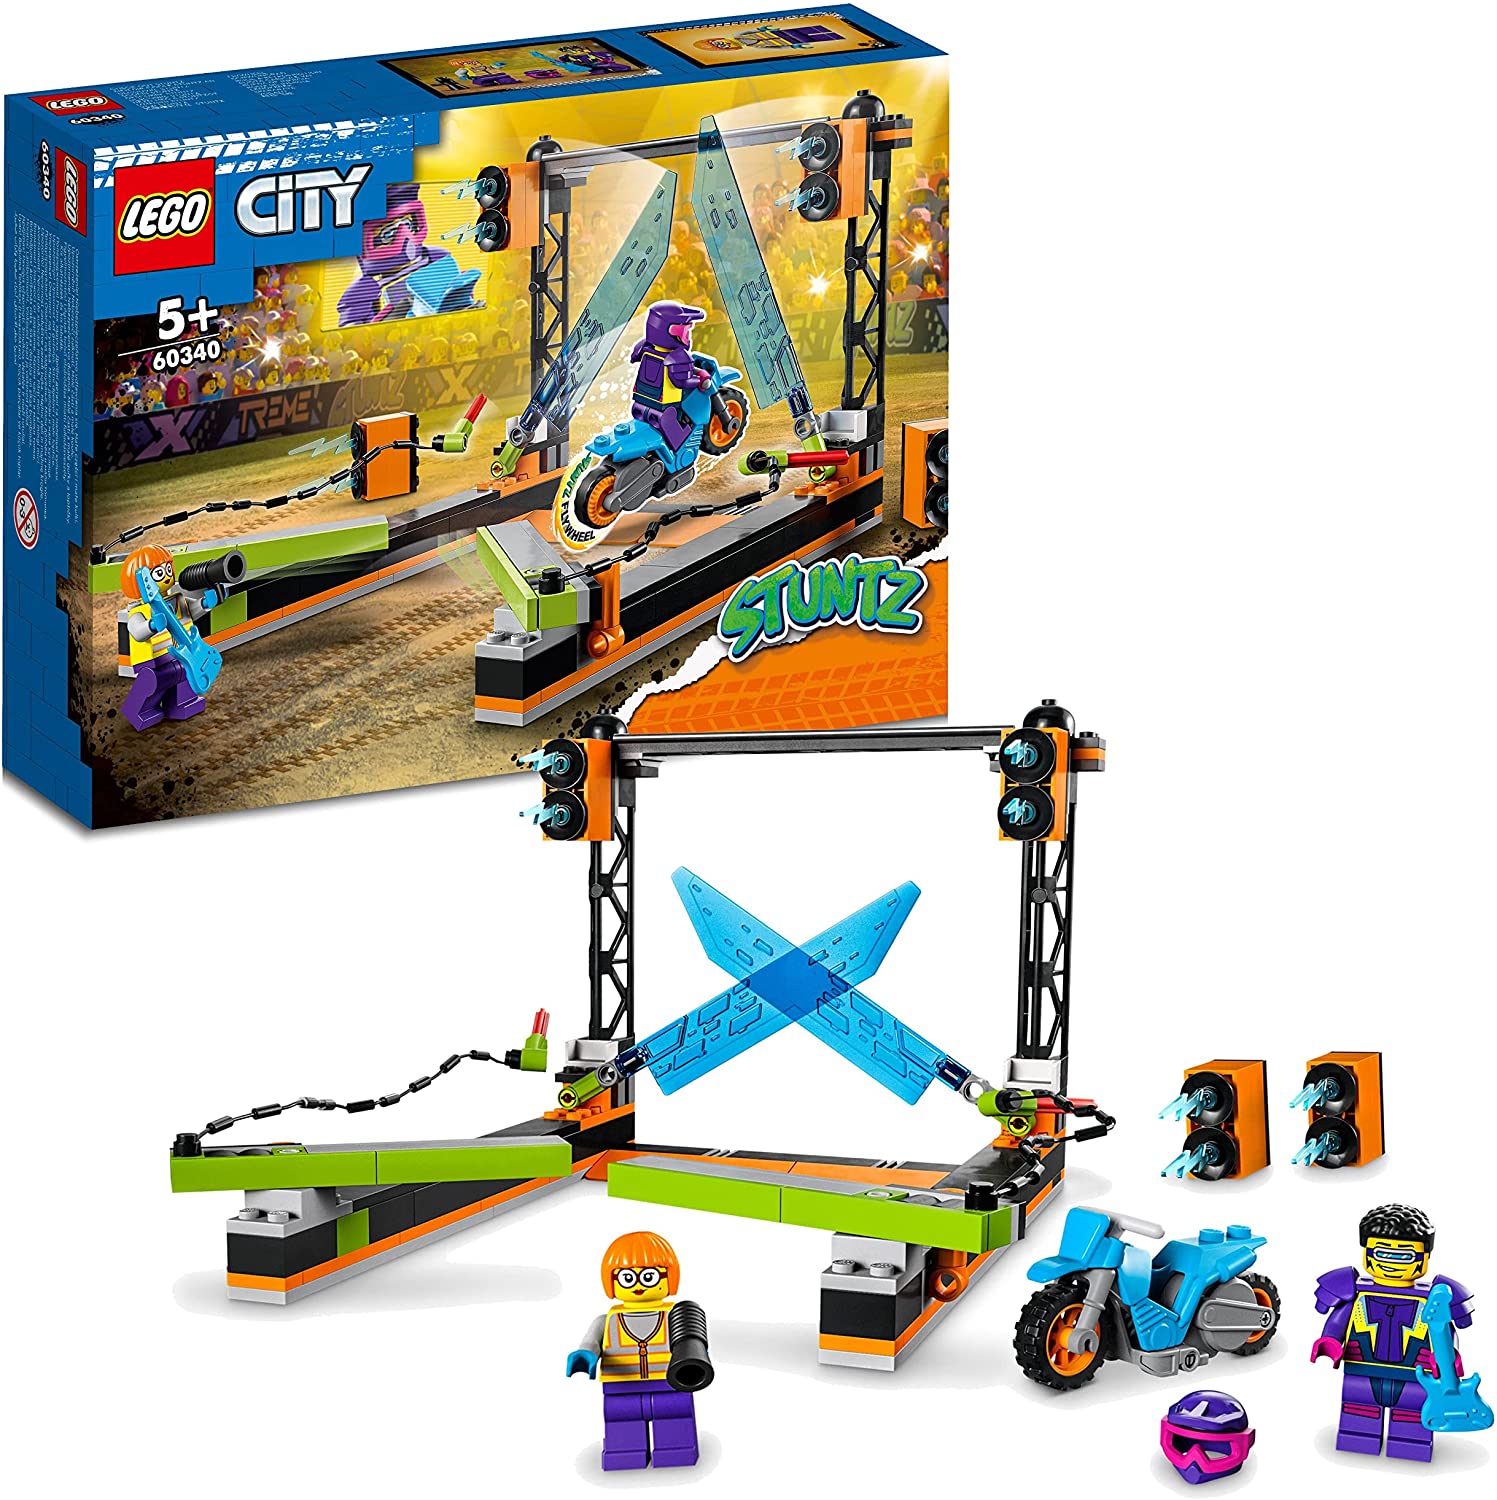 LEGO 60340 City Stuntz Obstacle Stunt Challenge Set Including Motorcycle and 2 Stunt Racer Mini Figures, Action Toy for Children from 5 Years